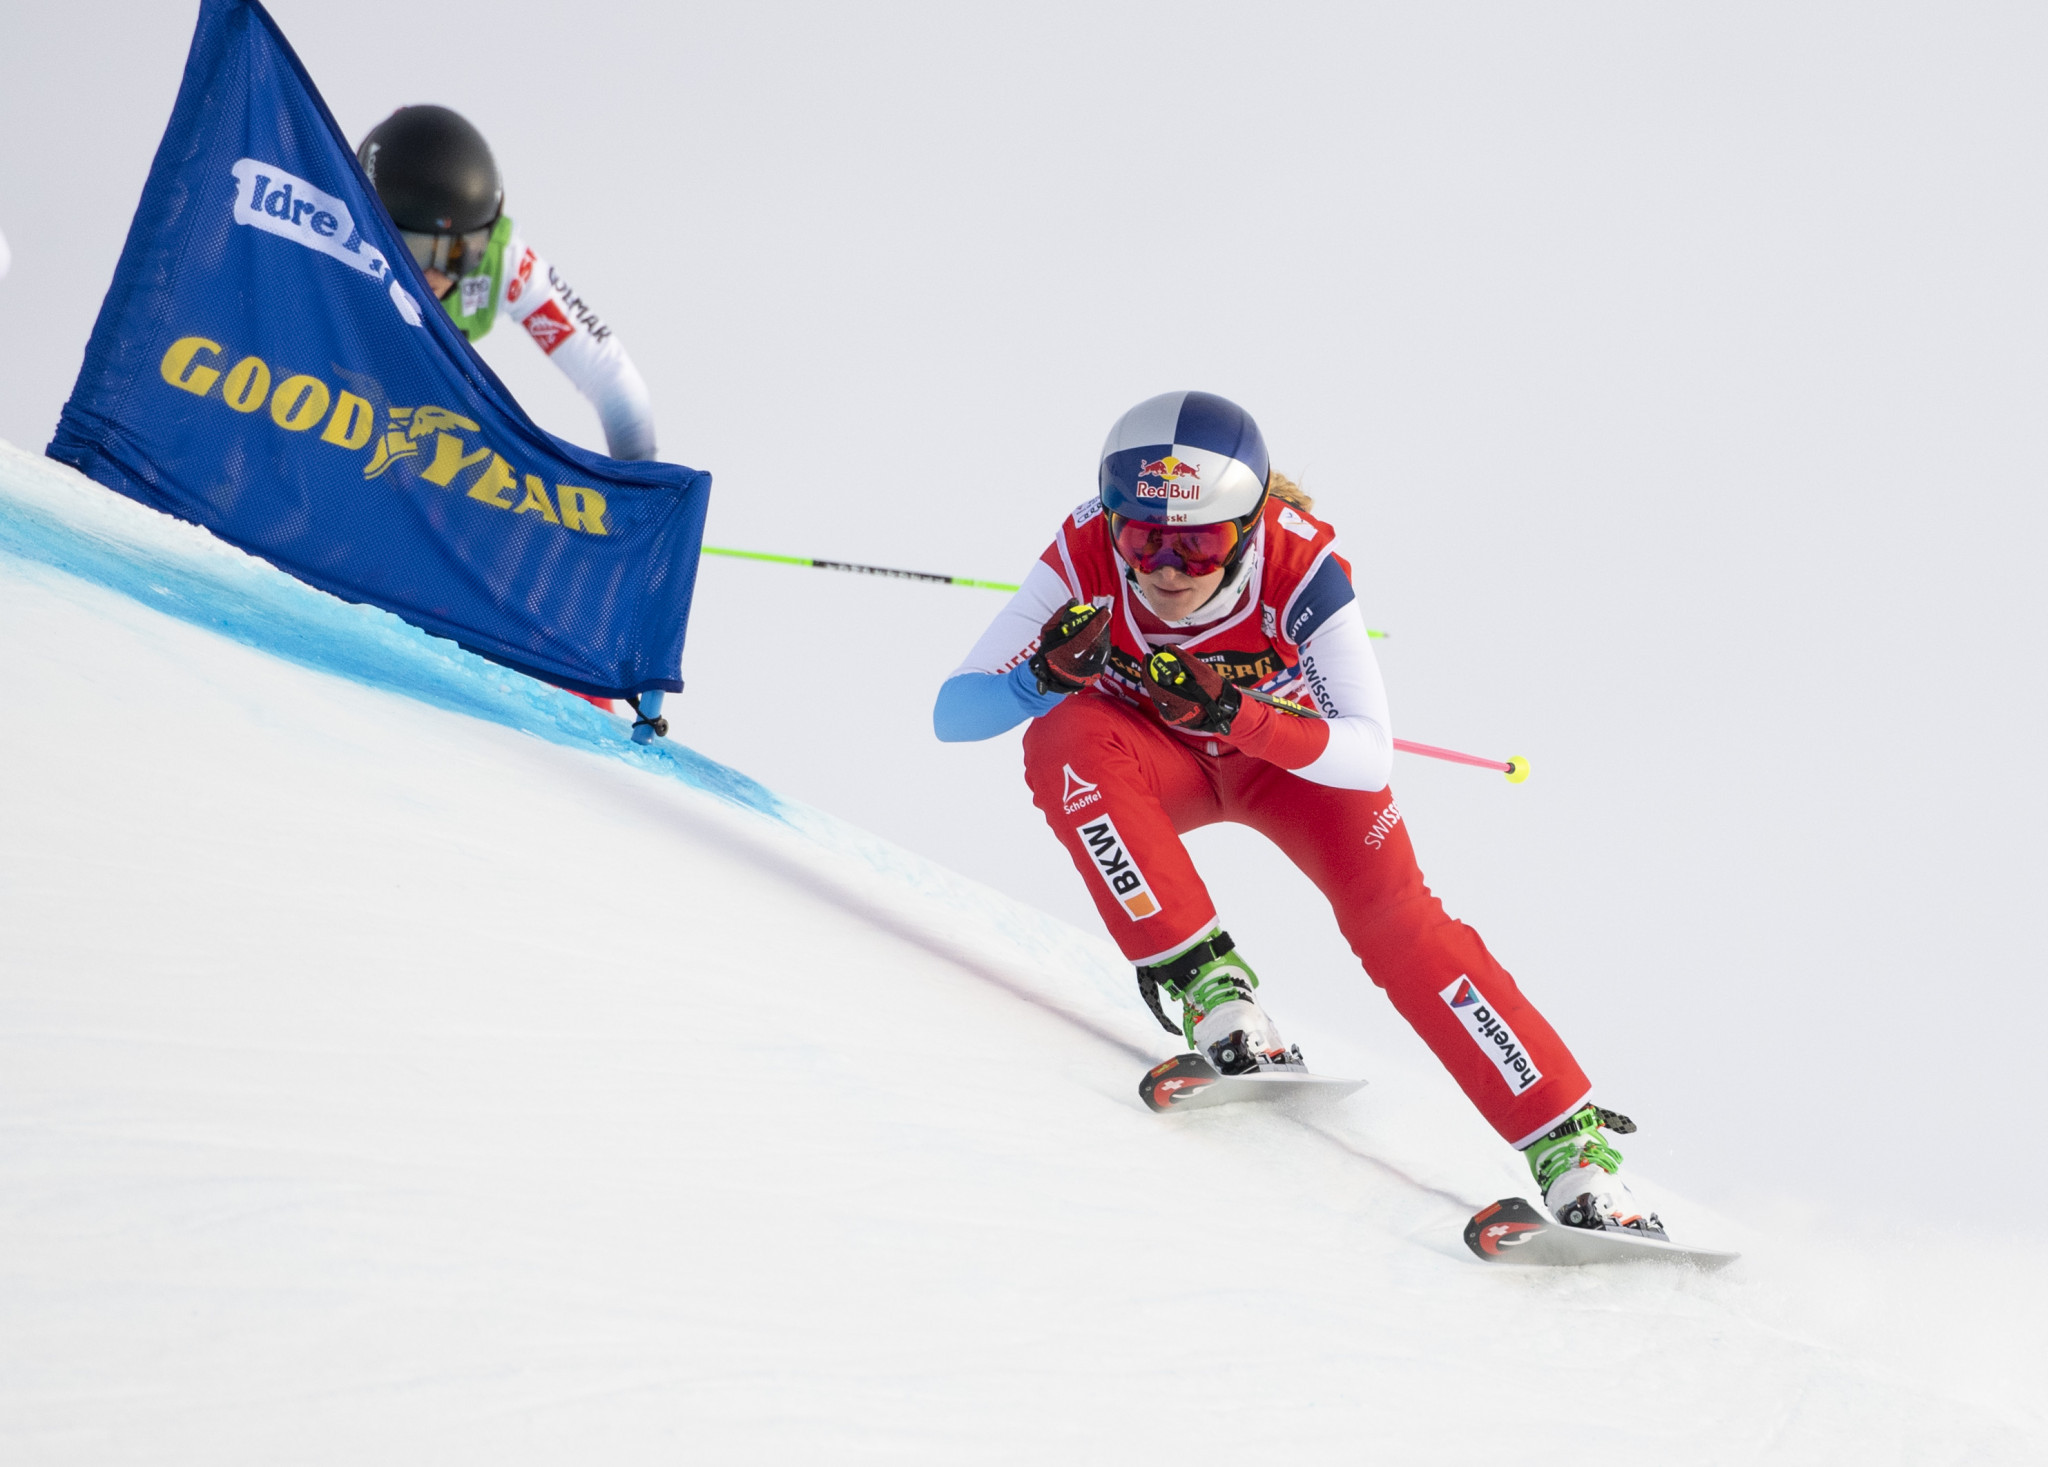 Smith ties record for FIS Ski Cross World Cup victories in Idre Fjäll